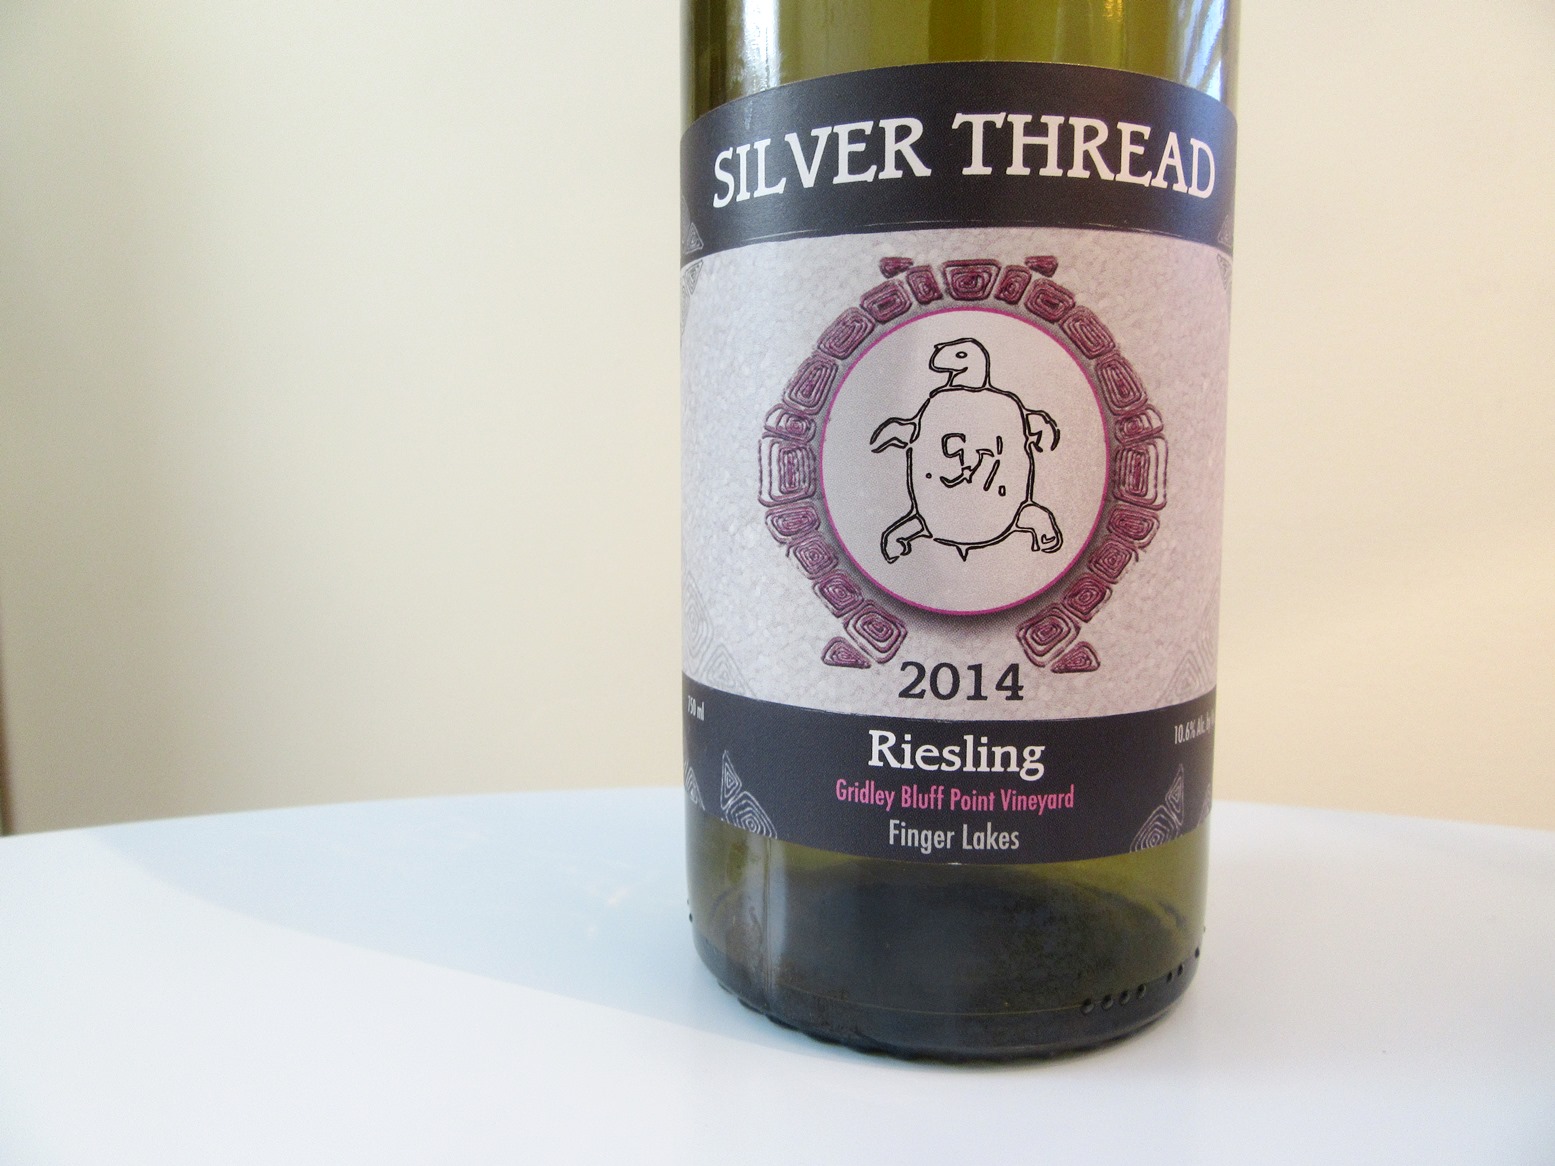 Silver Thread, Riesling 2014, Gridley Bluff Point Vineyard, Finger Lakes, New York, Wine Casual